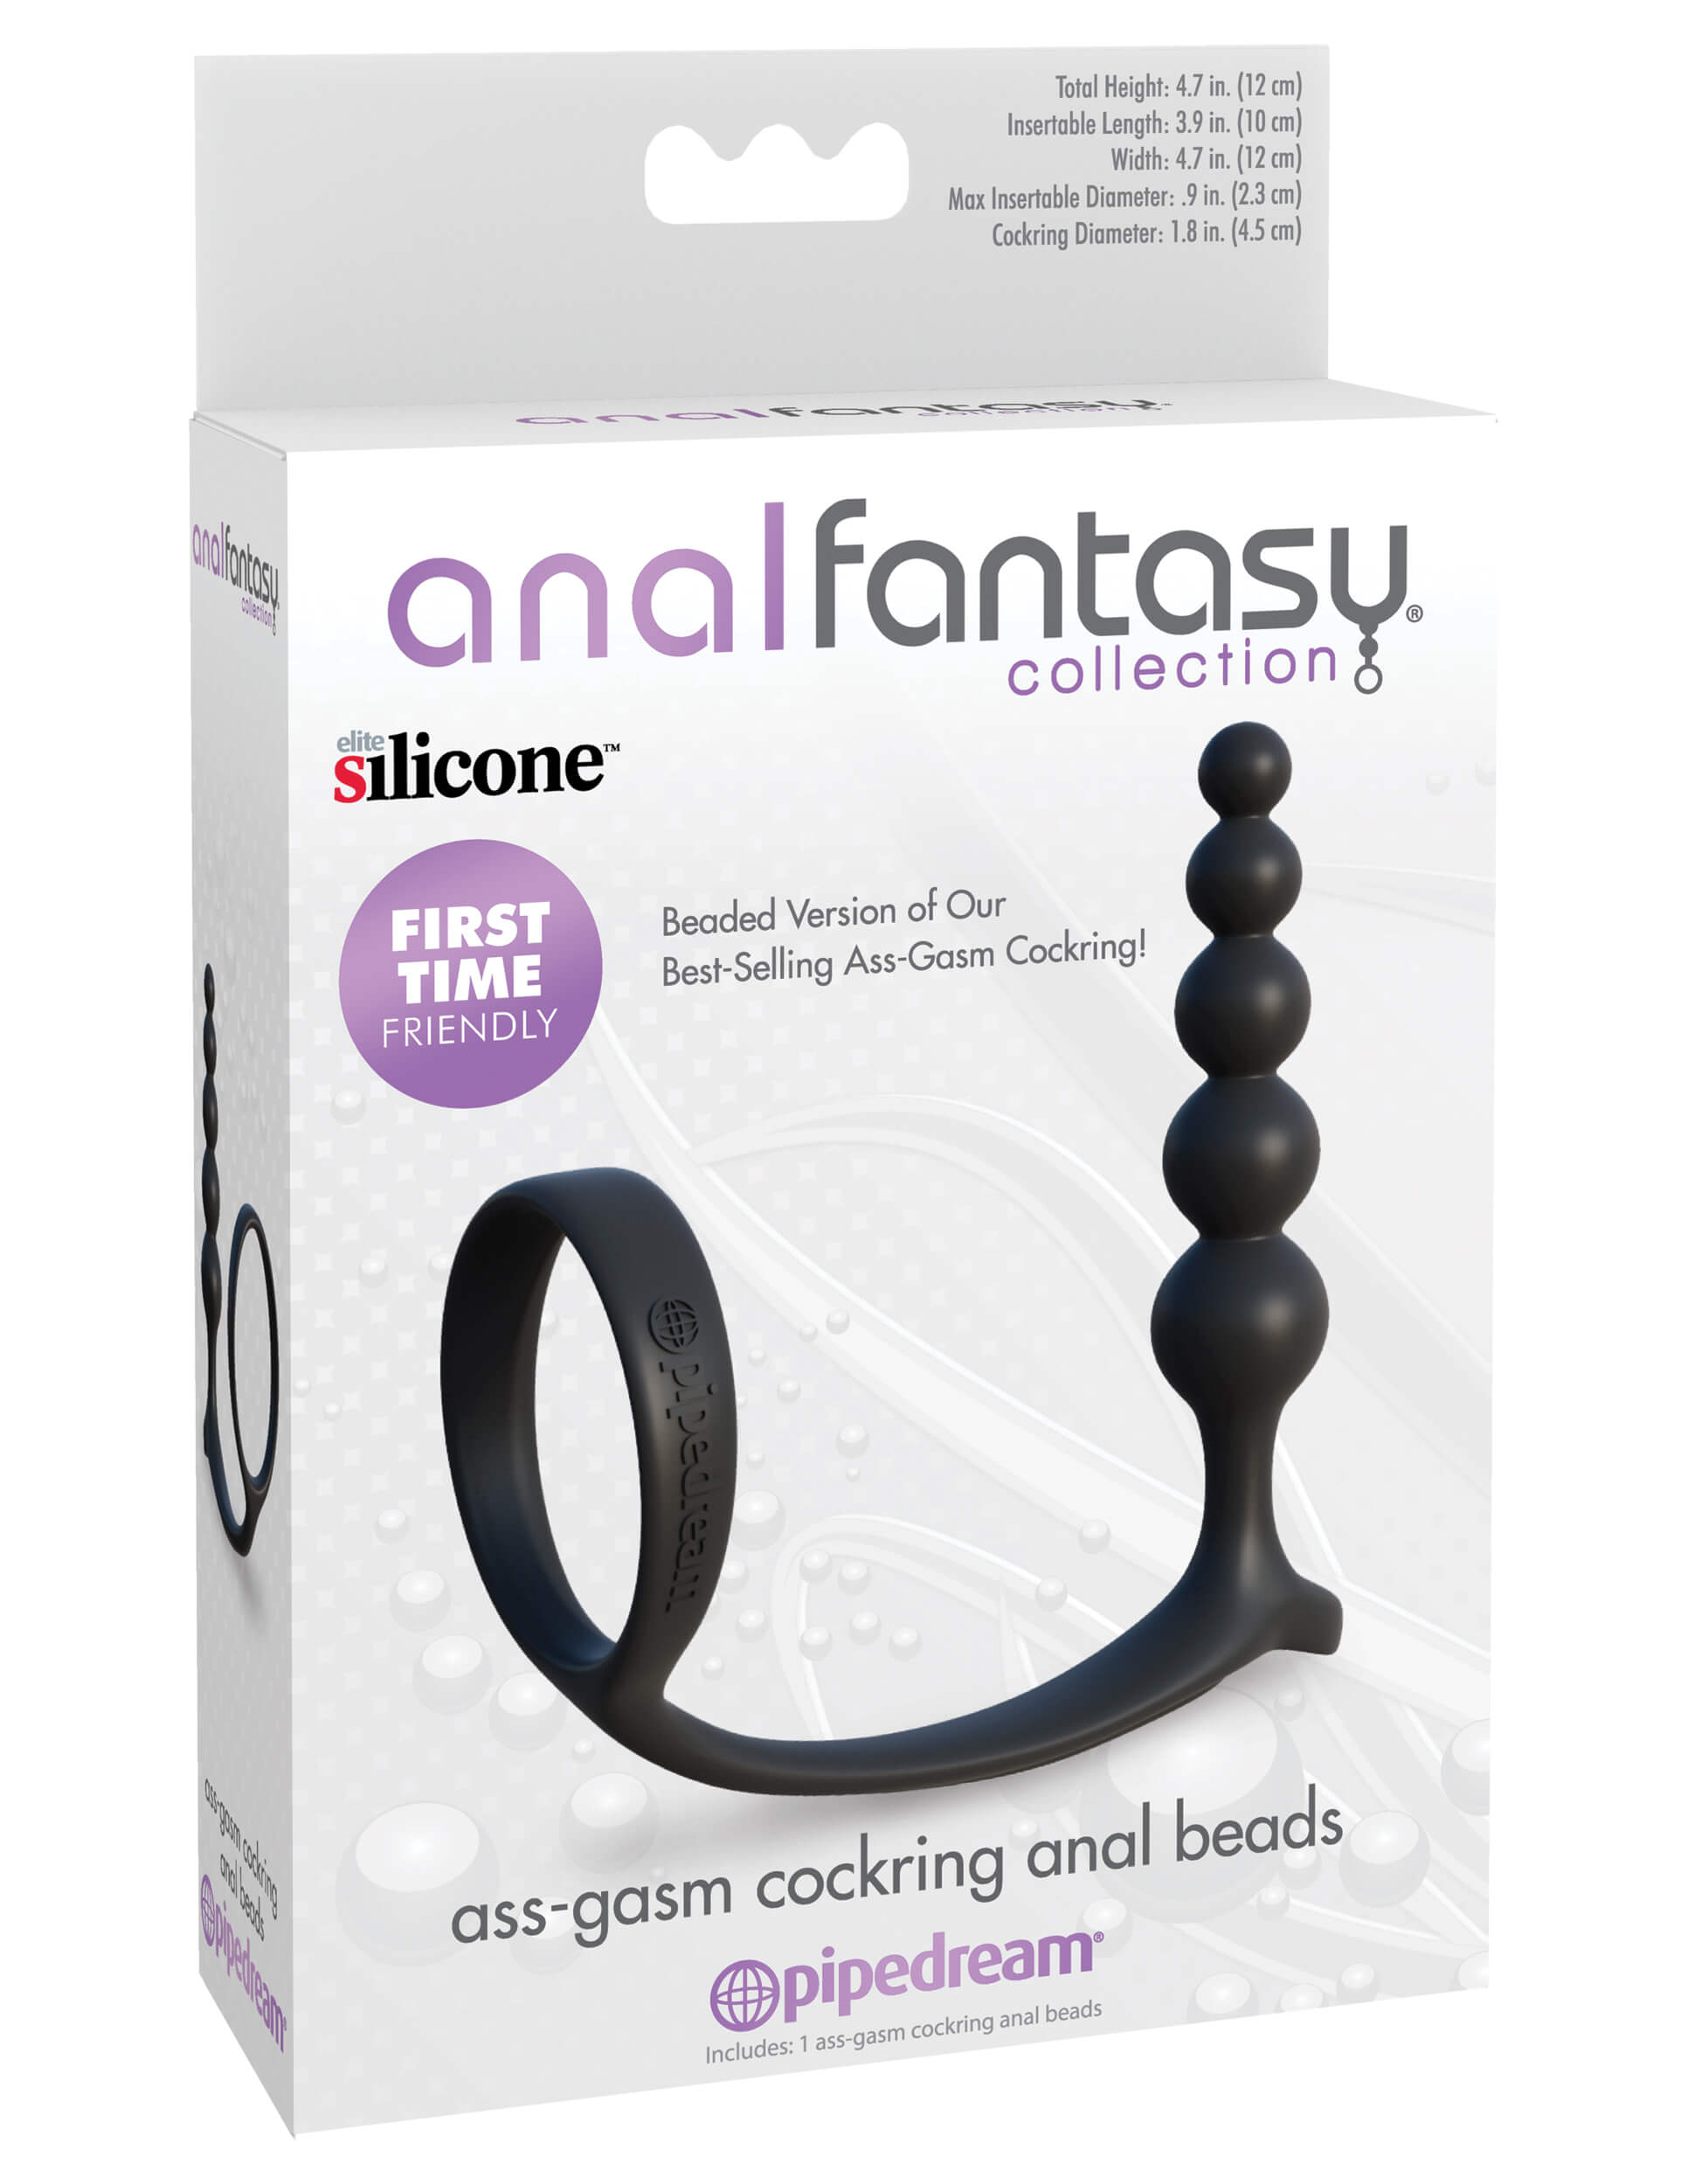 ANAL FANTASY ASS-GASM COCKRING ANAL BEADS - PD469623